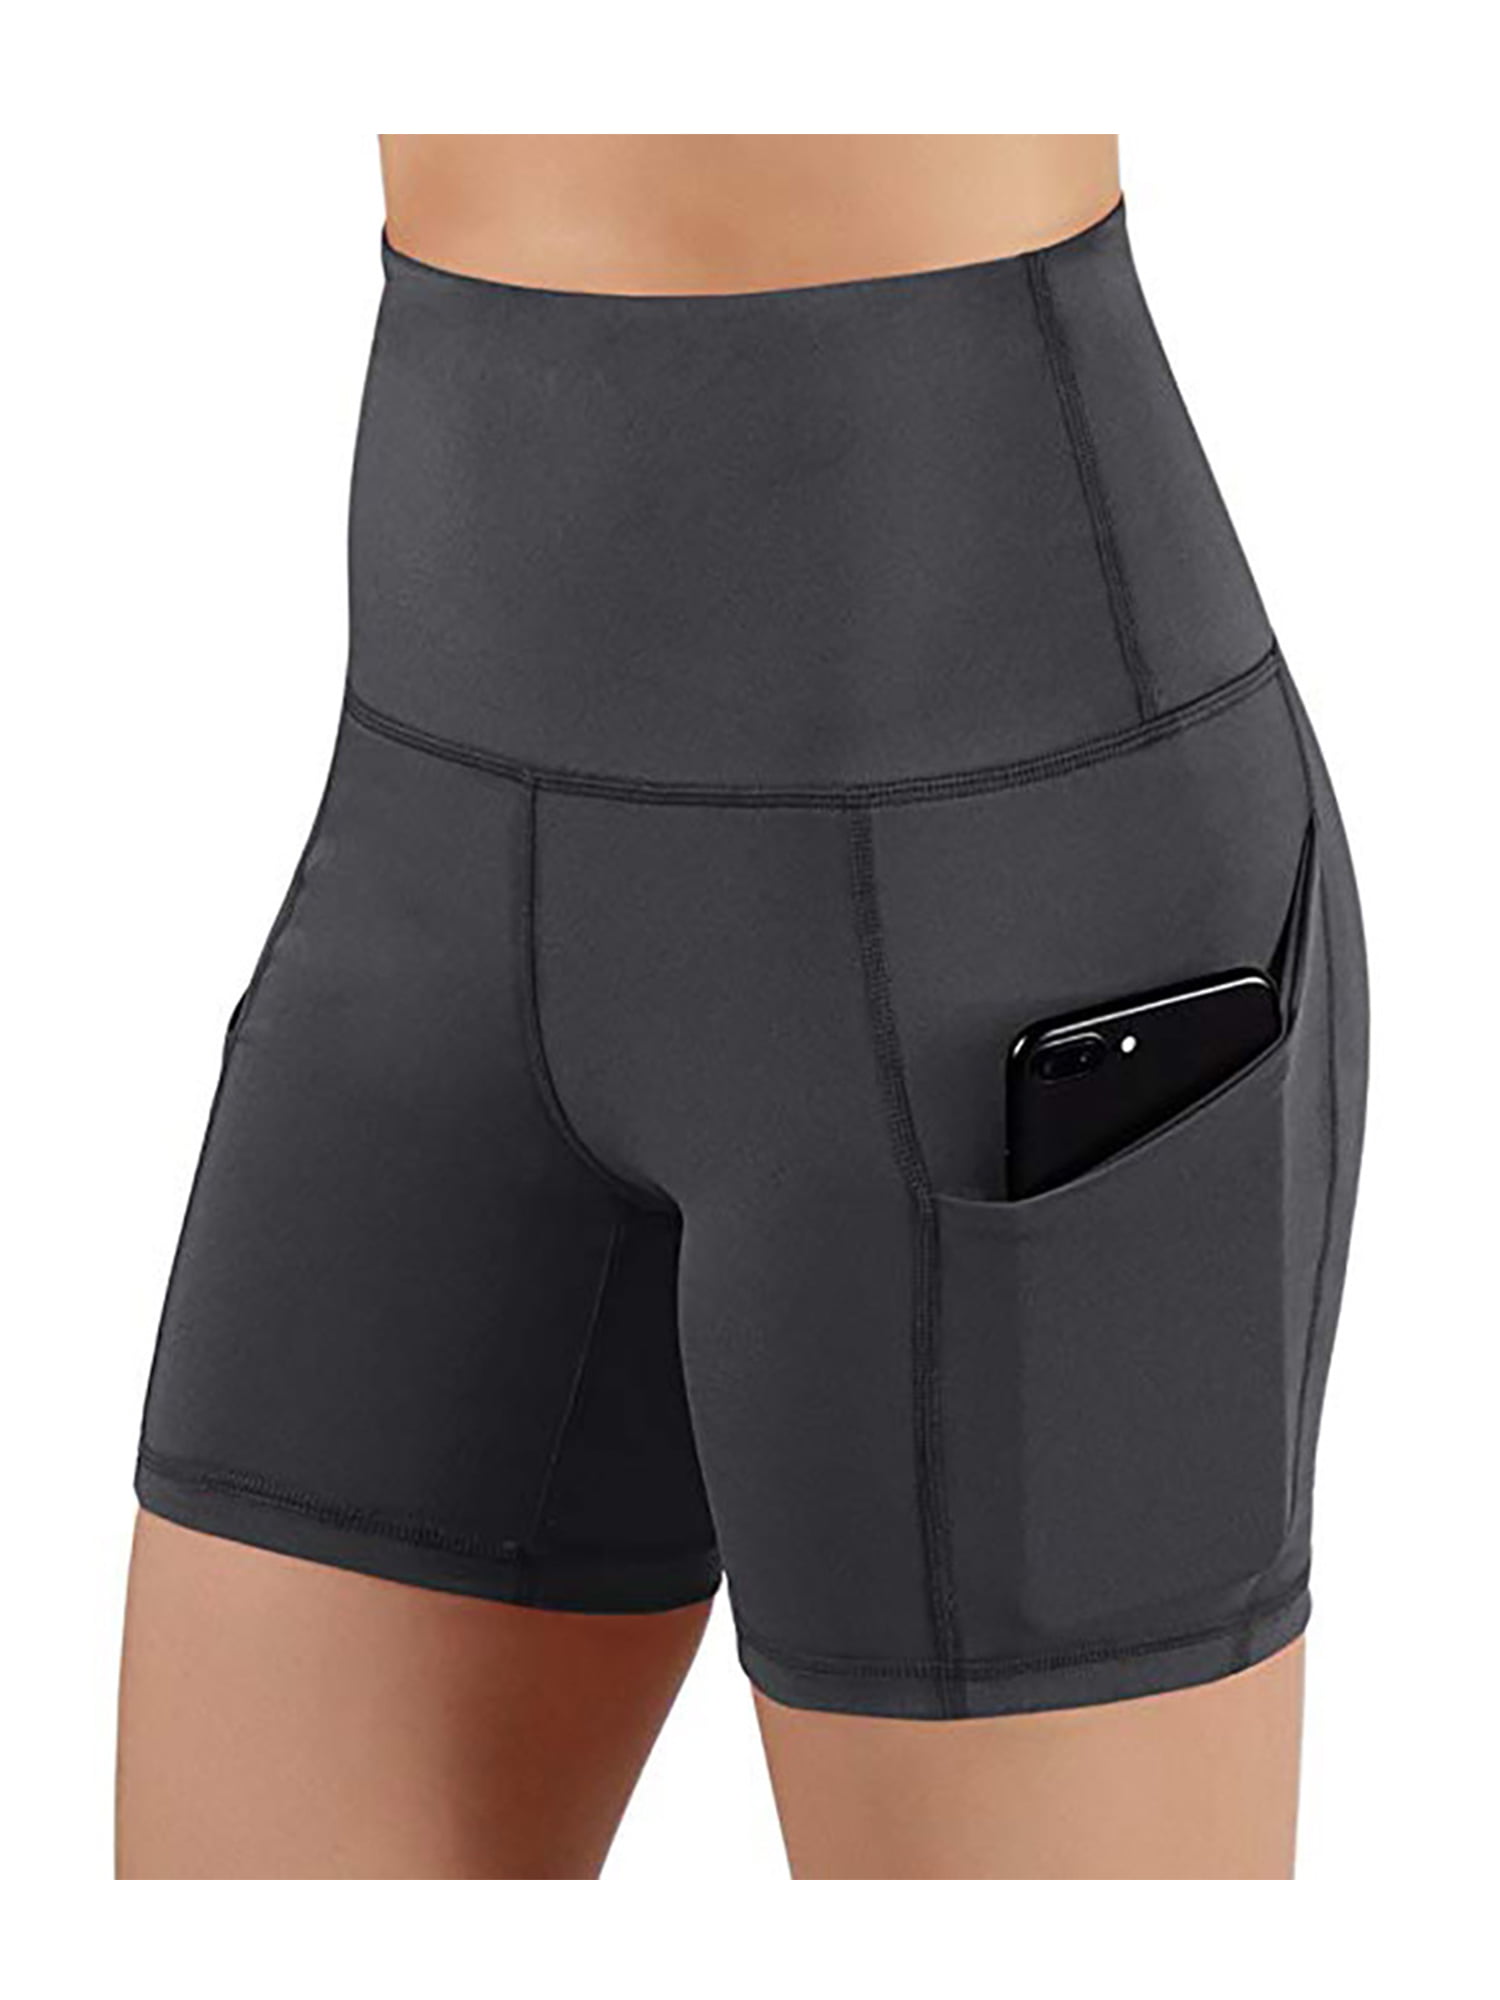 HARTPOR Womens 5 Workout Shorts High Waist Tummy Control Yoga Trainning Exercise Shorts with Pockets